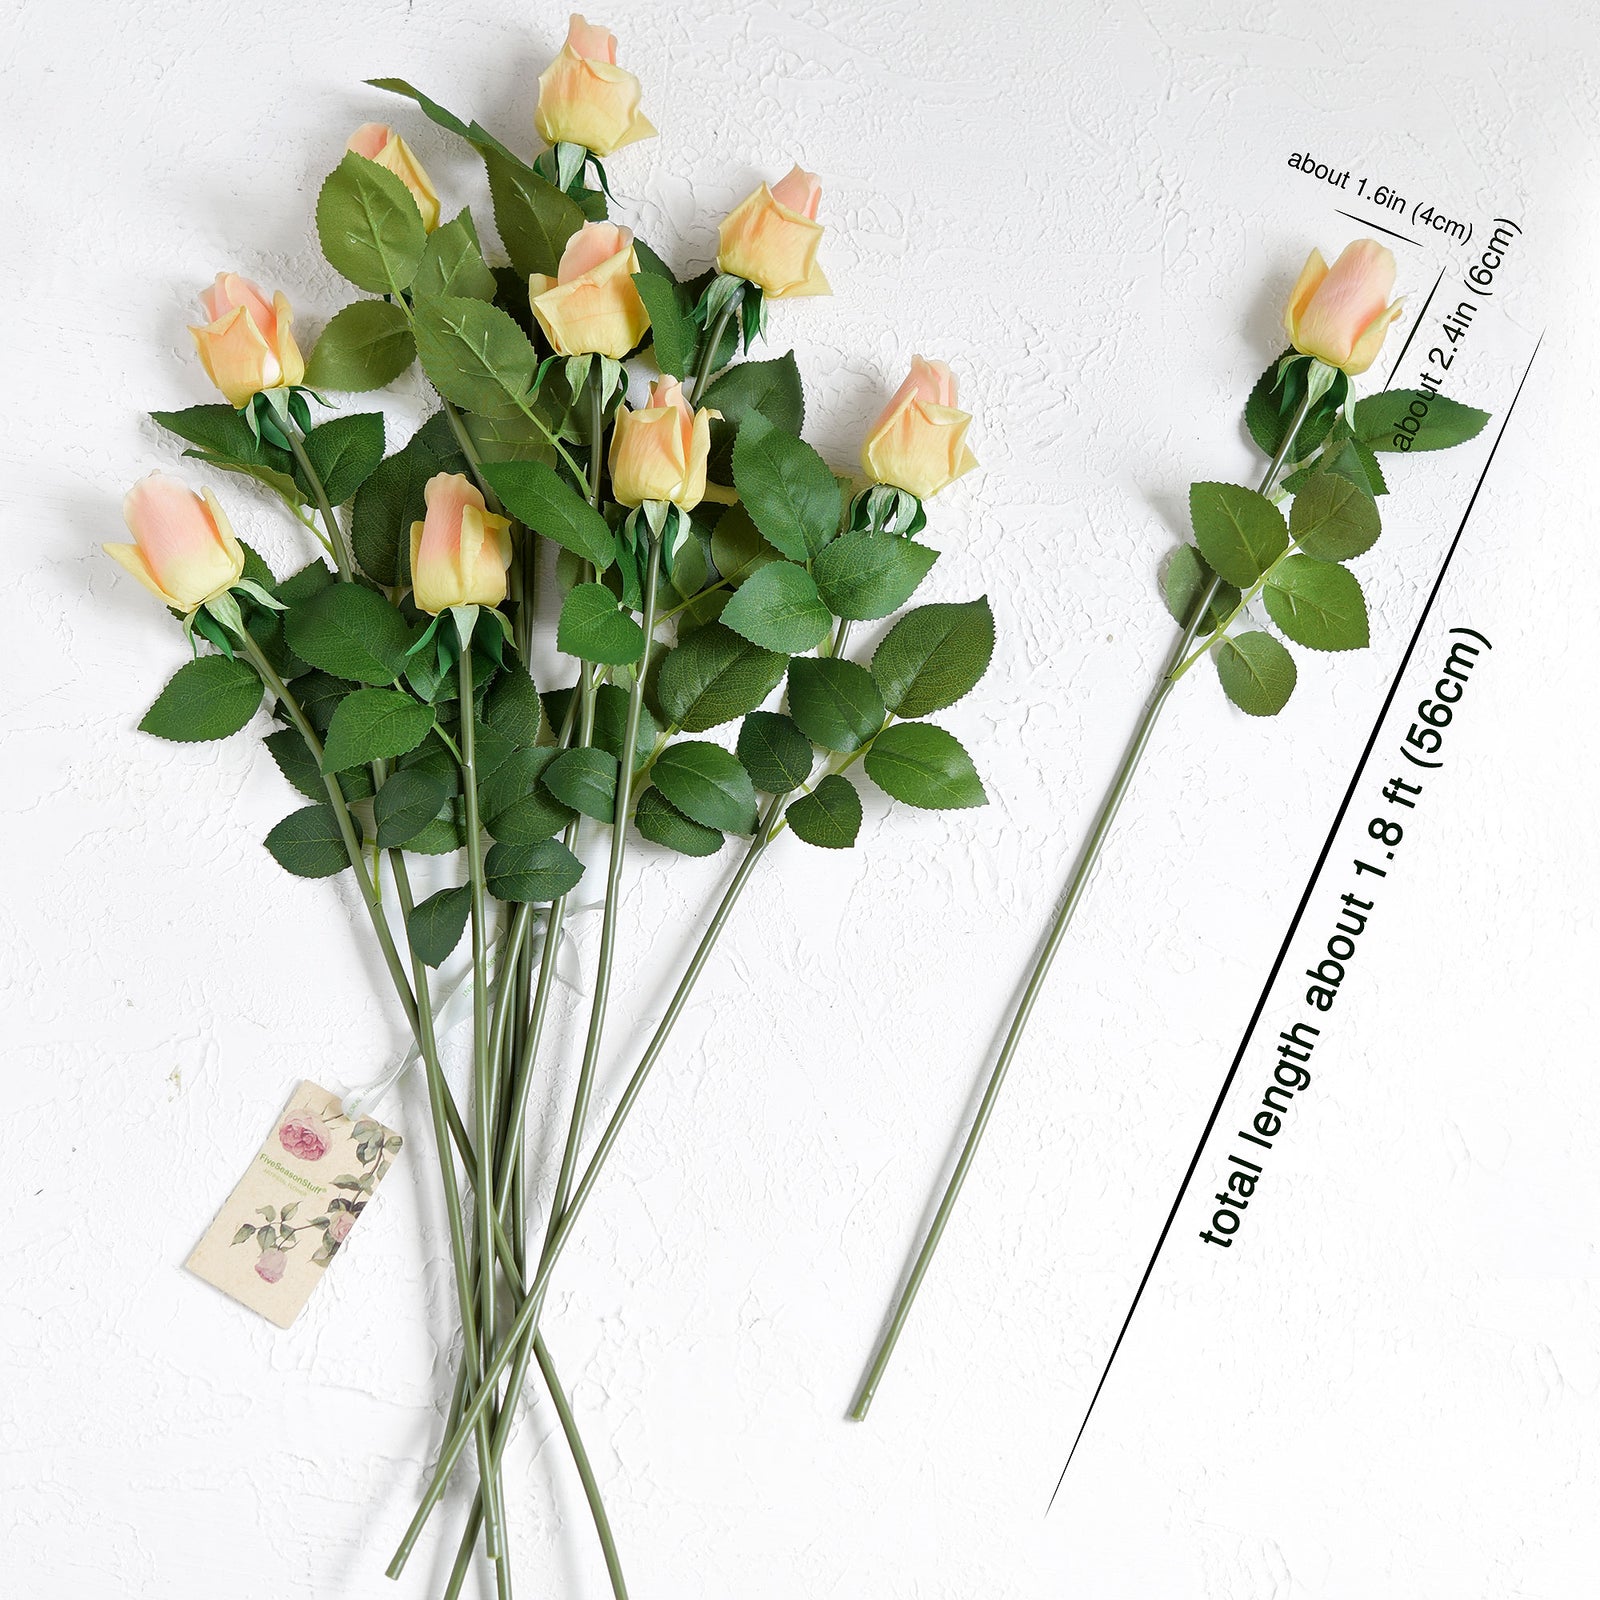 Apricot Pinkish Long Stem 21 inches Roses Real Touch Silk Artificial Flowers 12 Stems